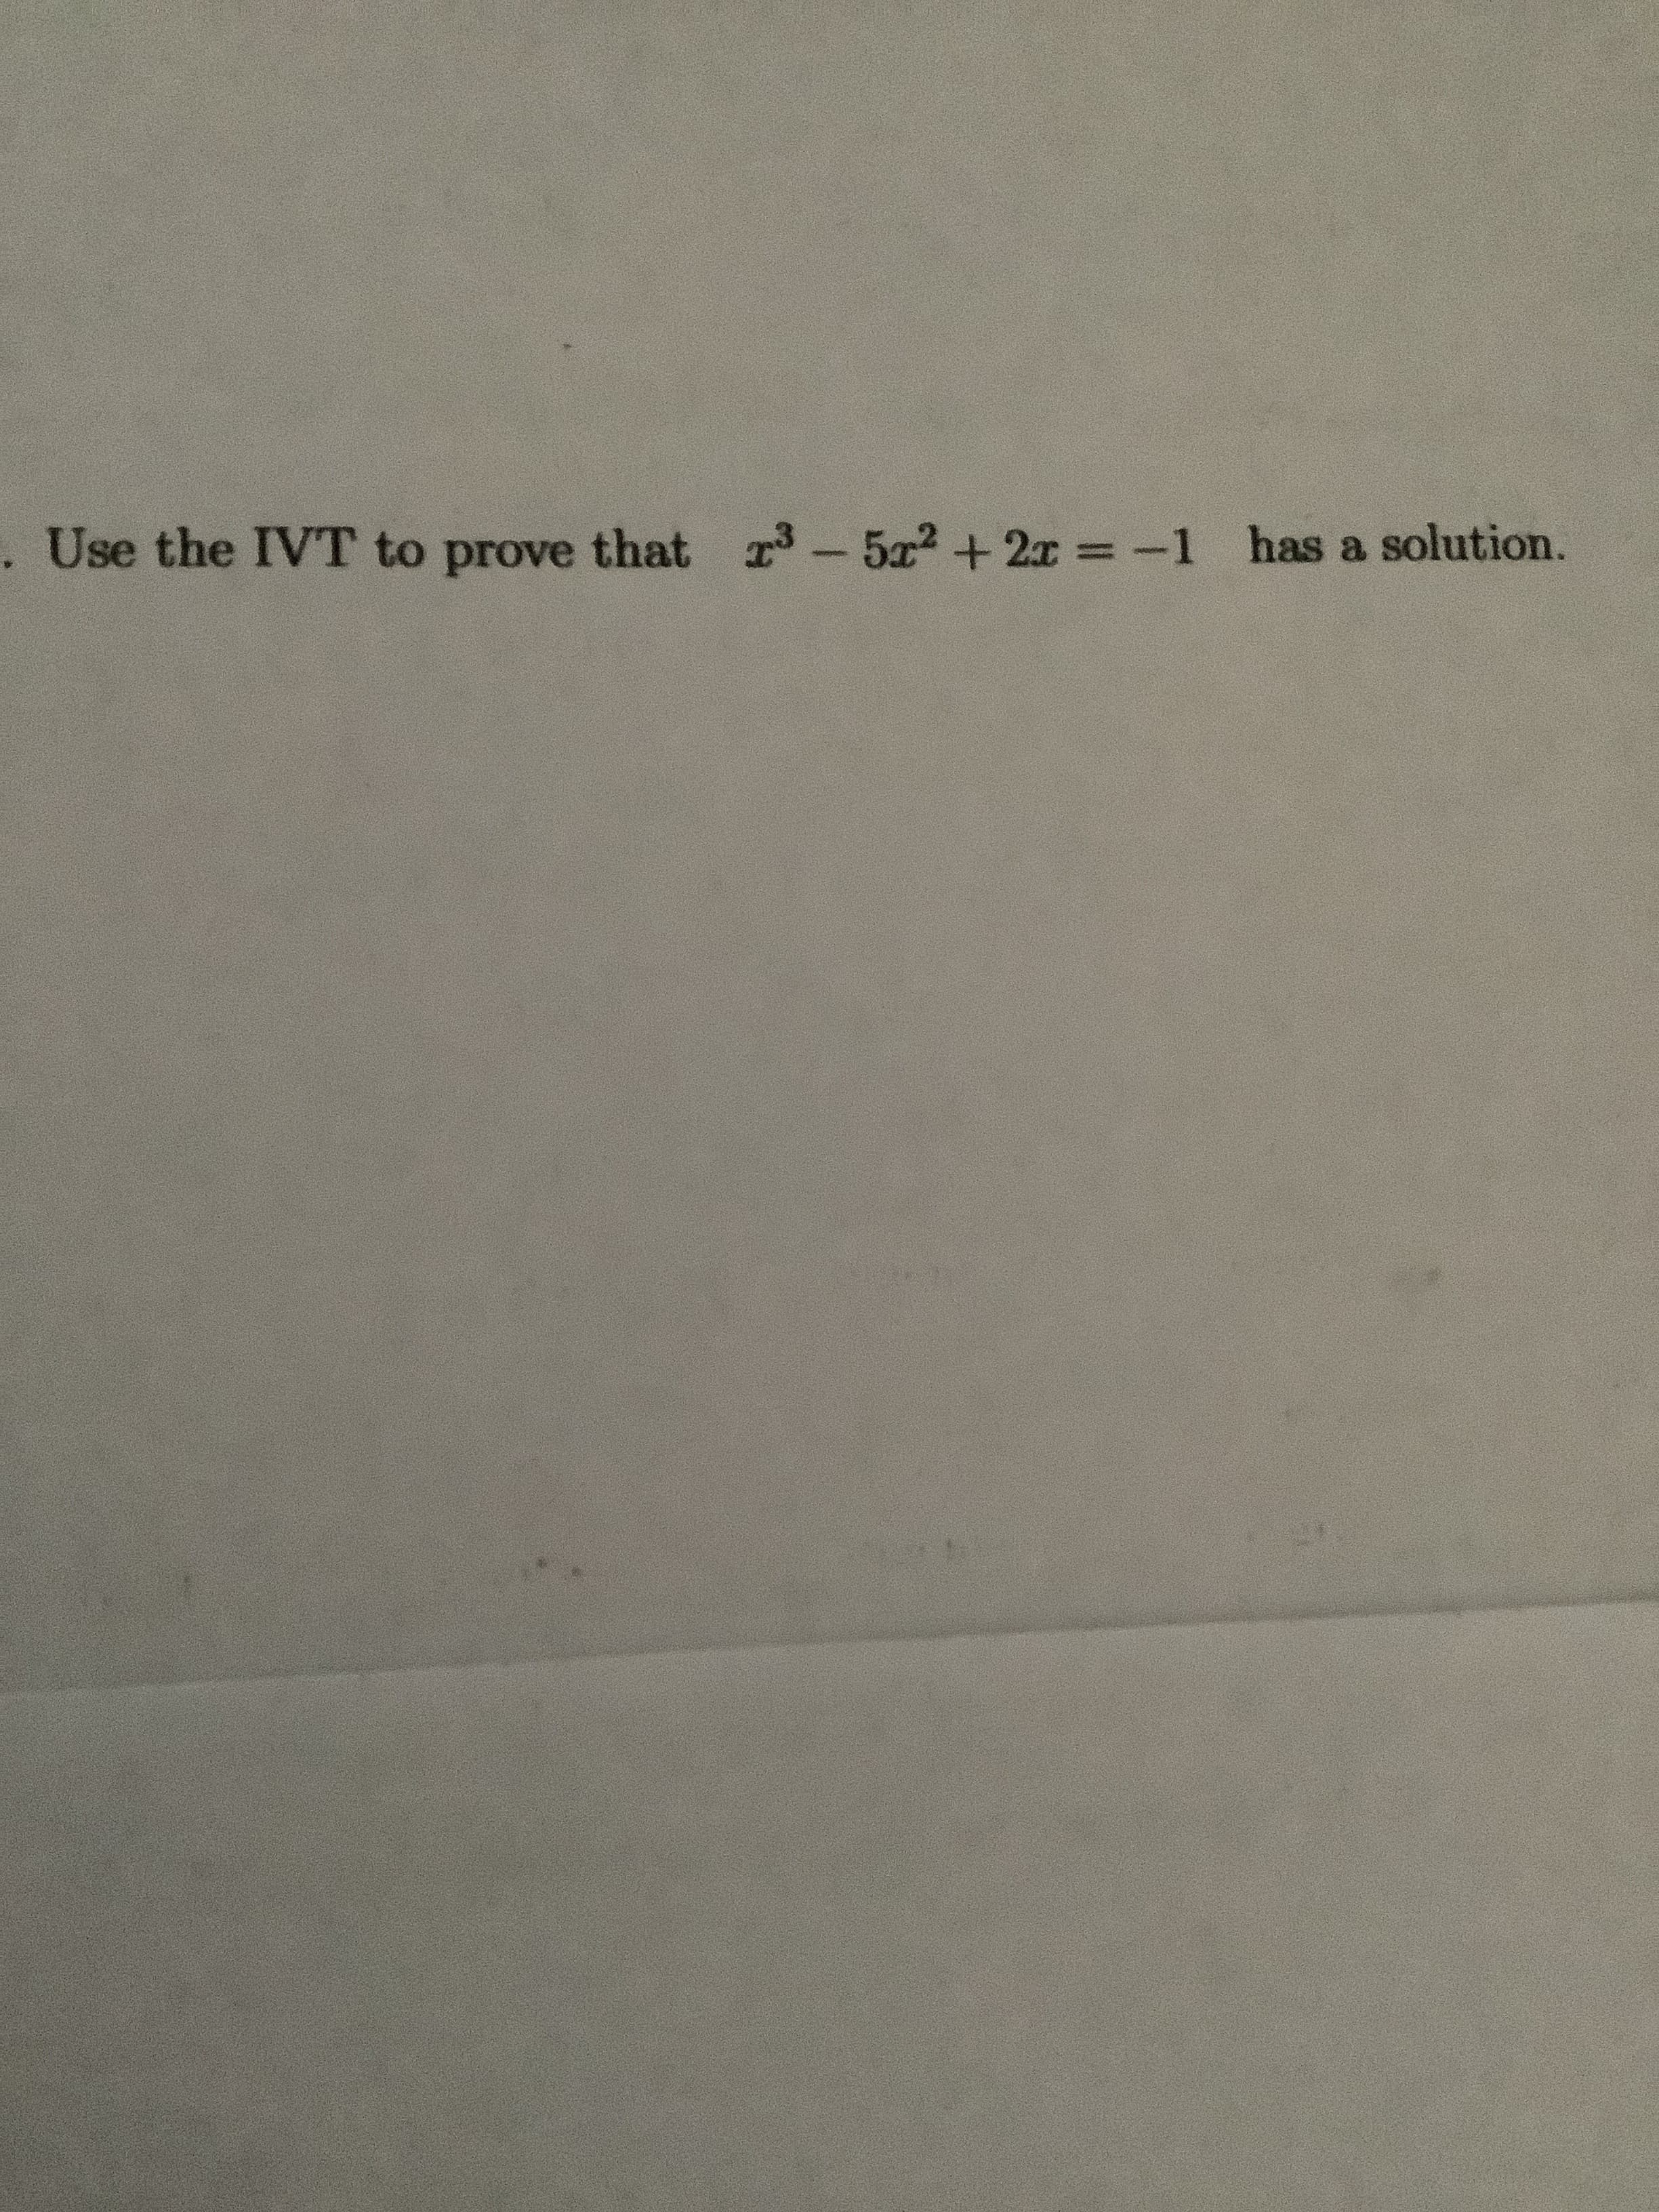 Use the IVT to prove that r-5a2 +2x = -1 has a solution.
